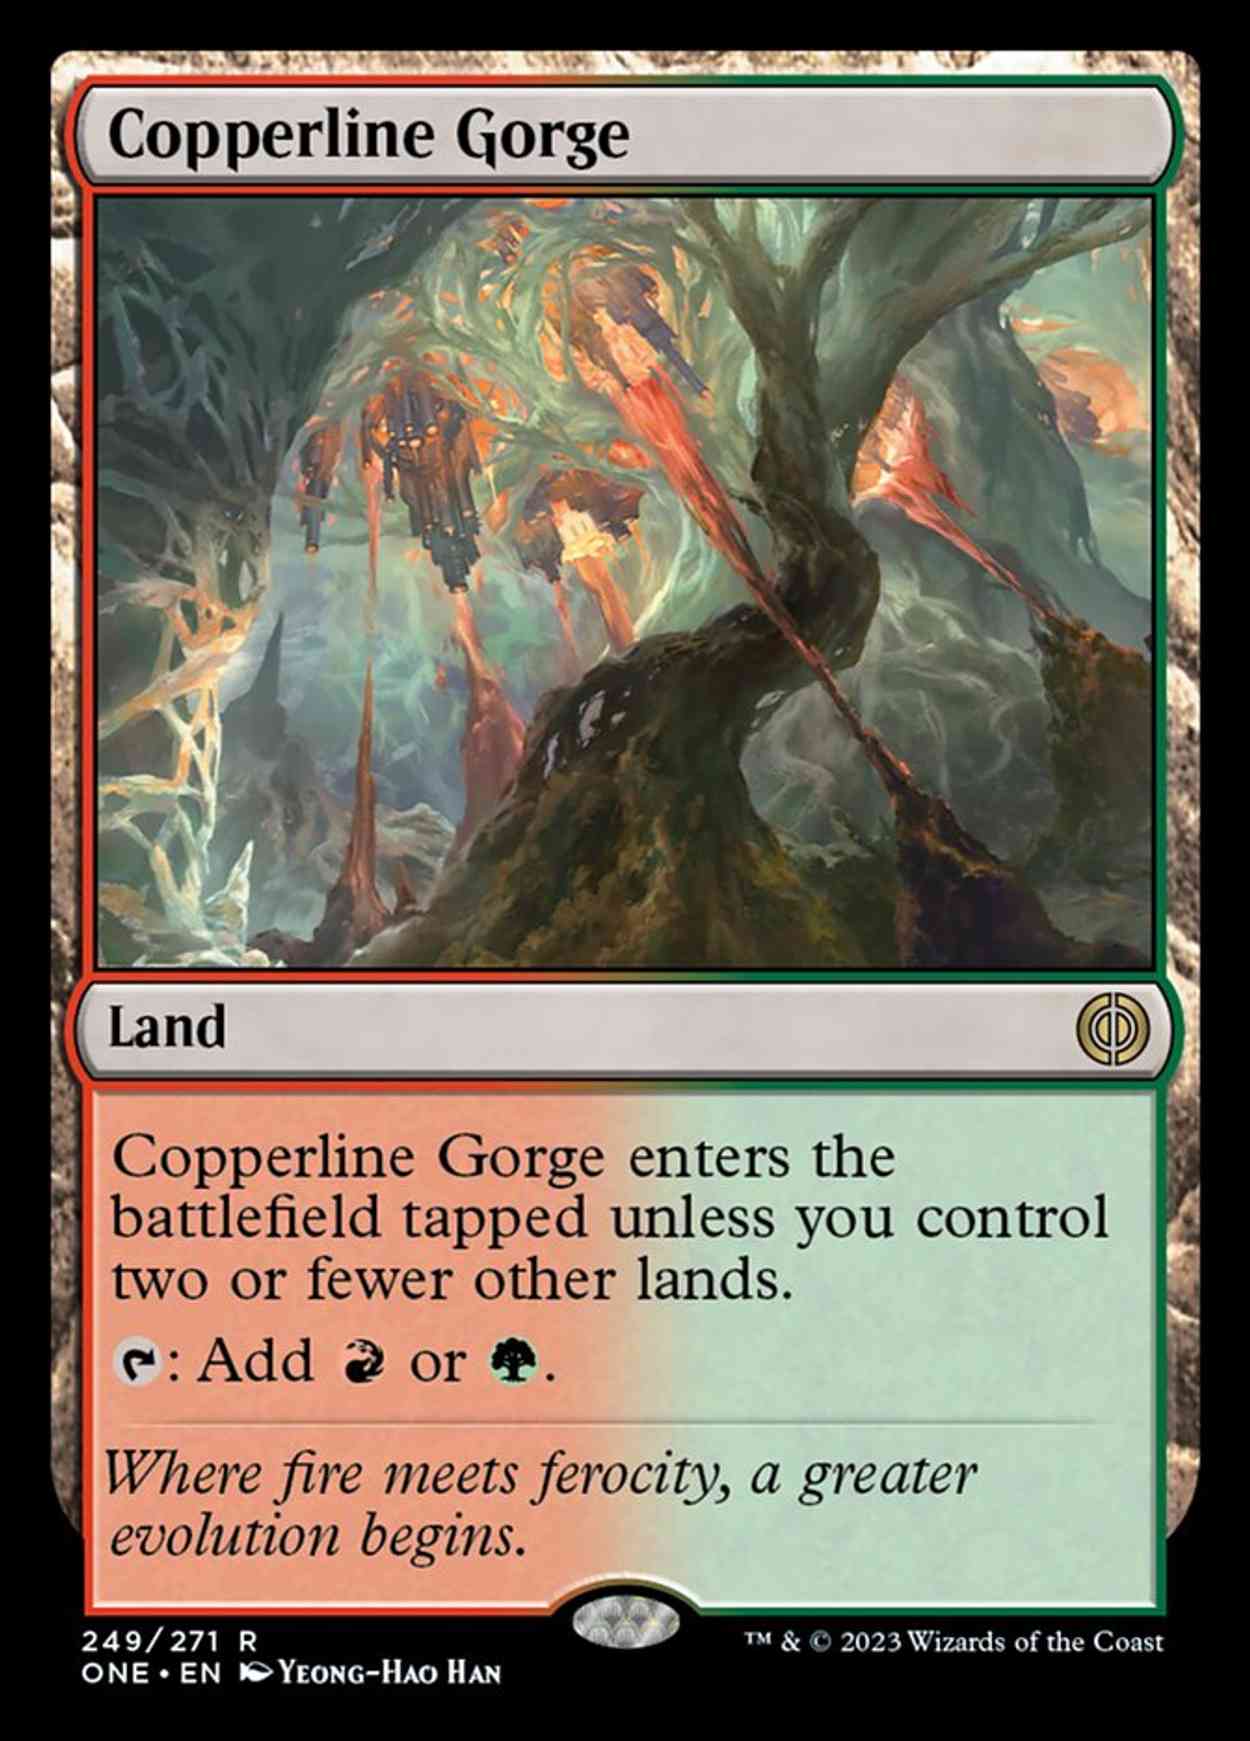 Copperline Gorge magic card front